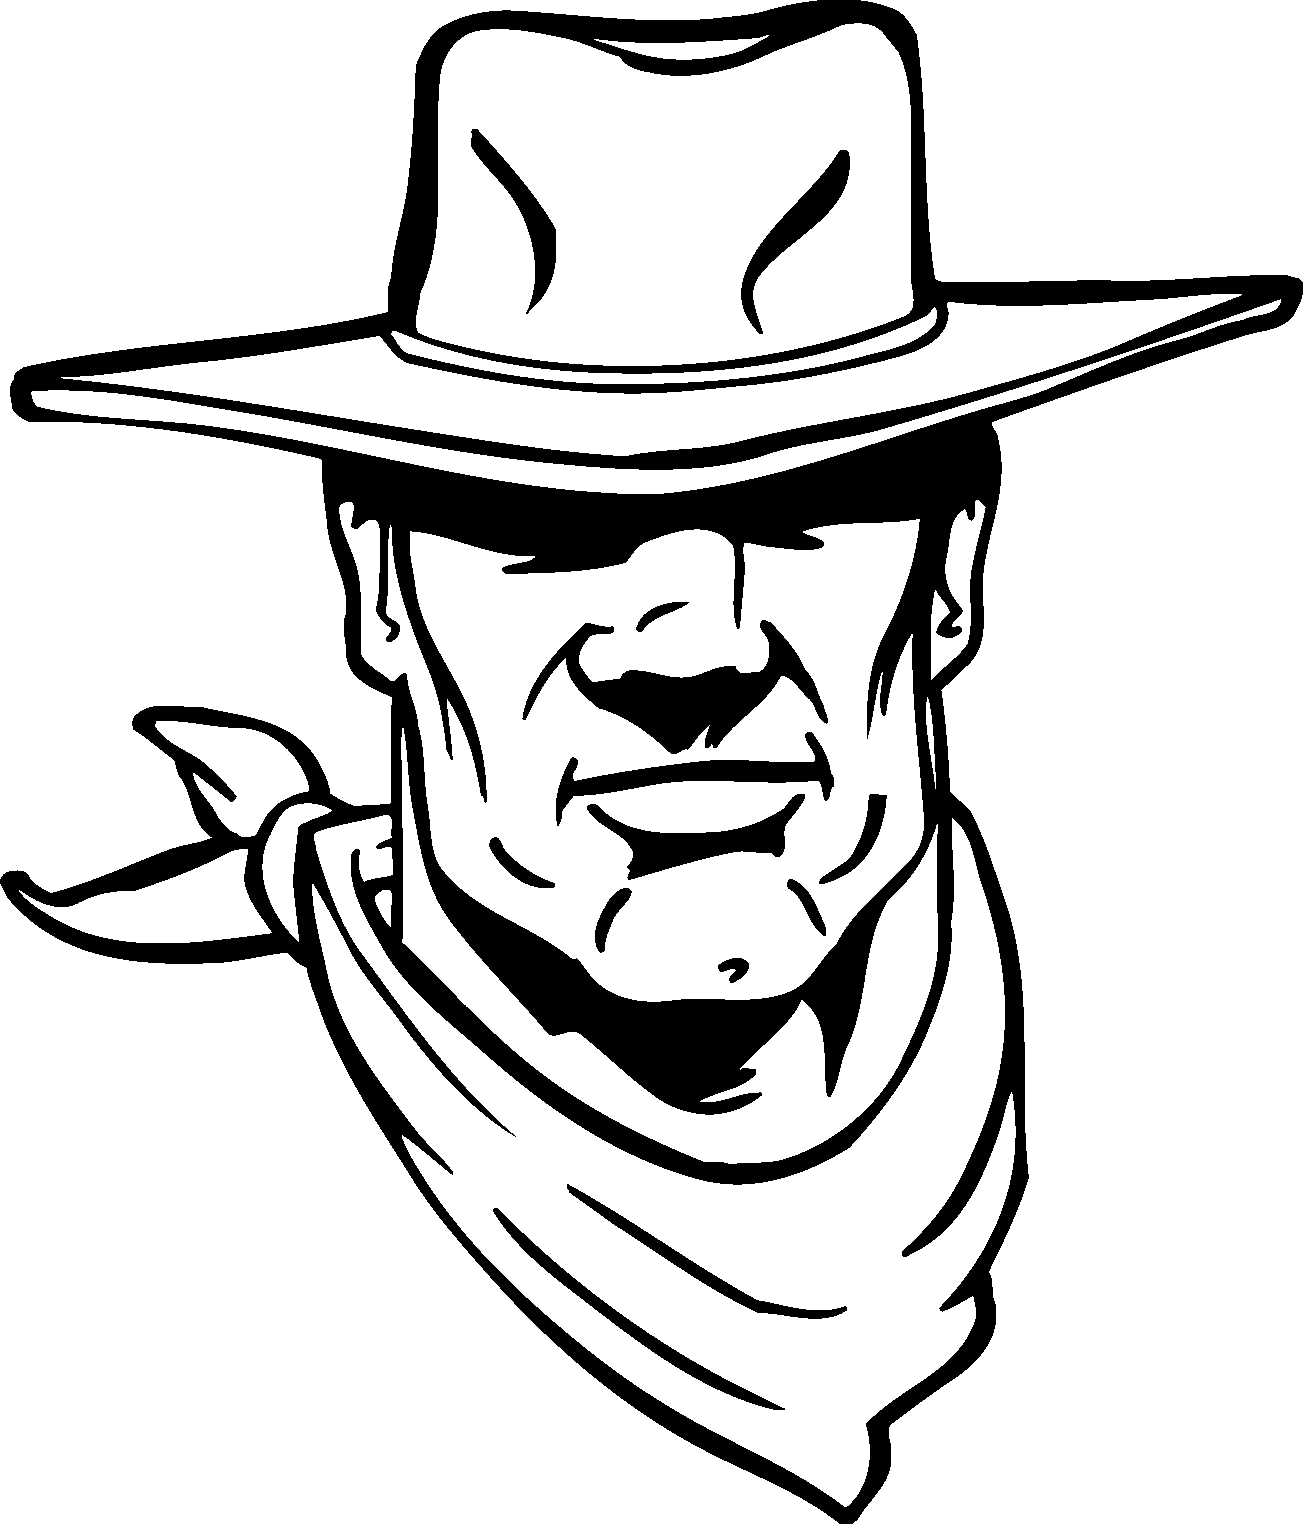 Cowboys Images Gallery - Cliparts.co